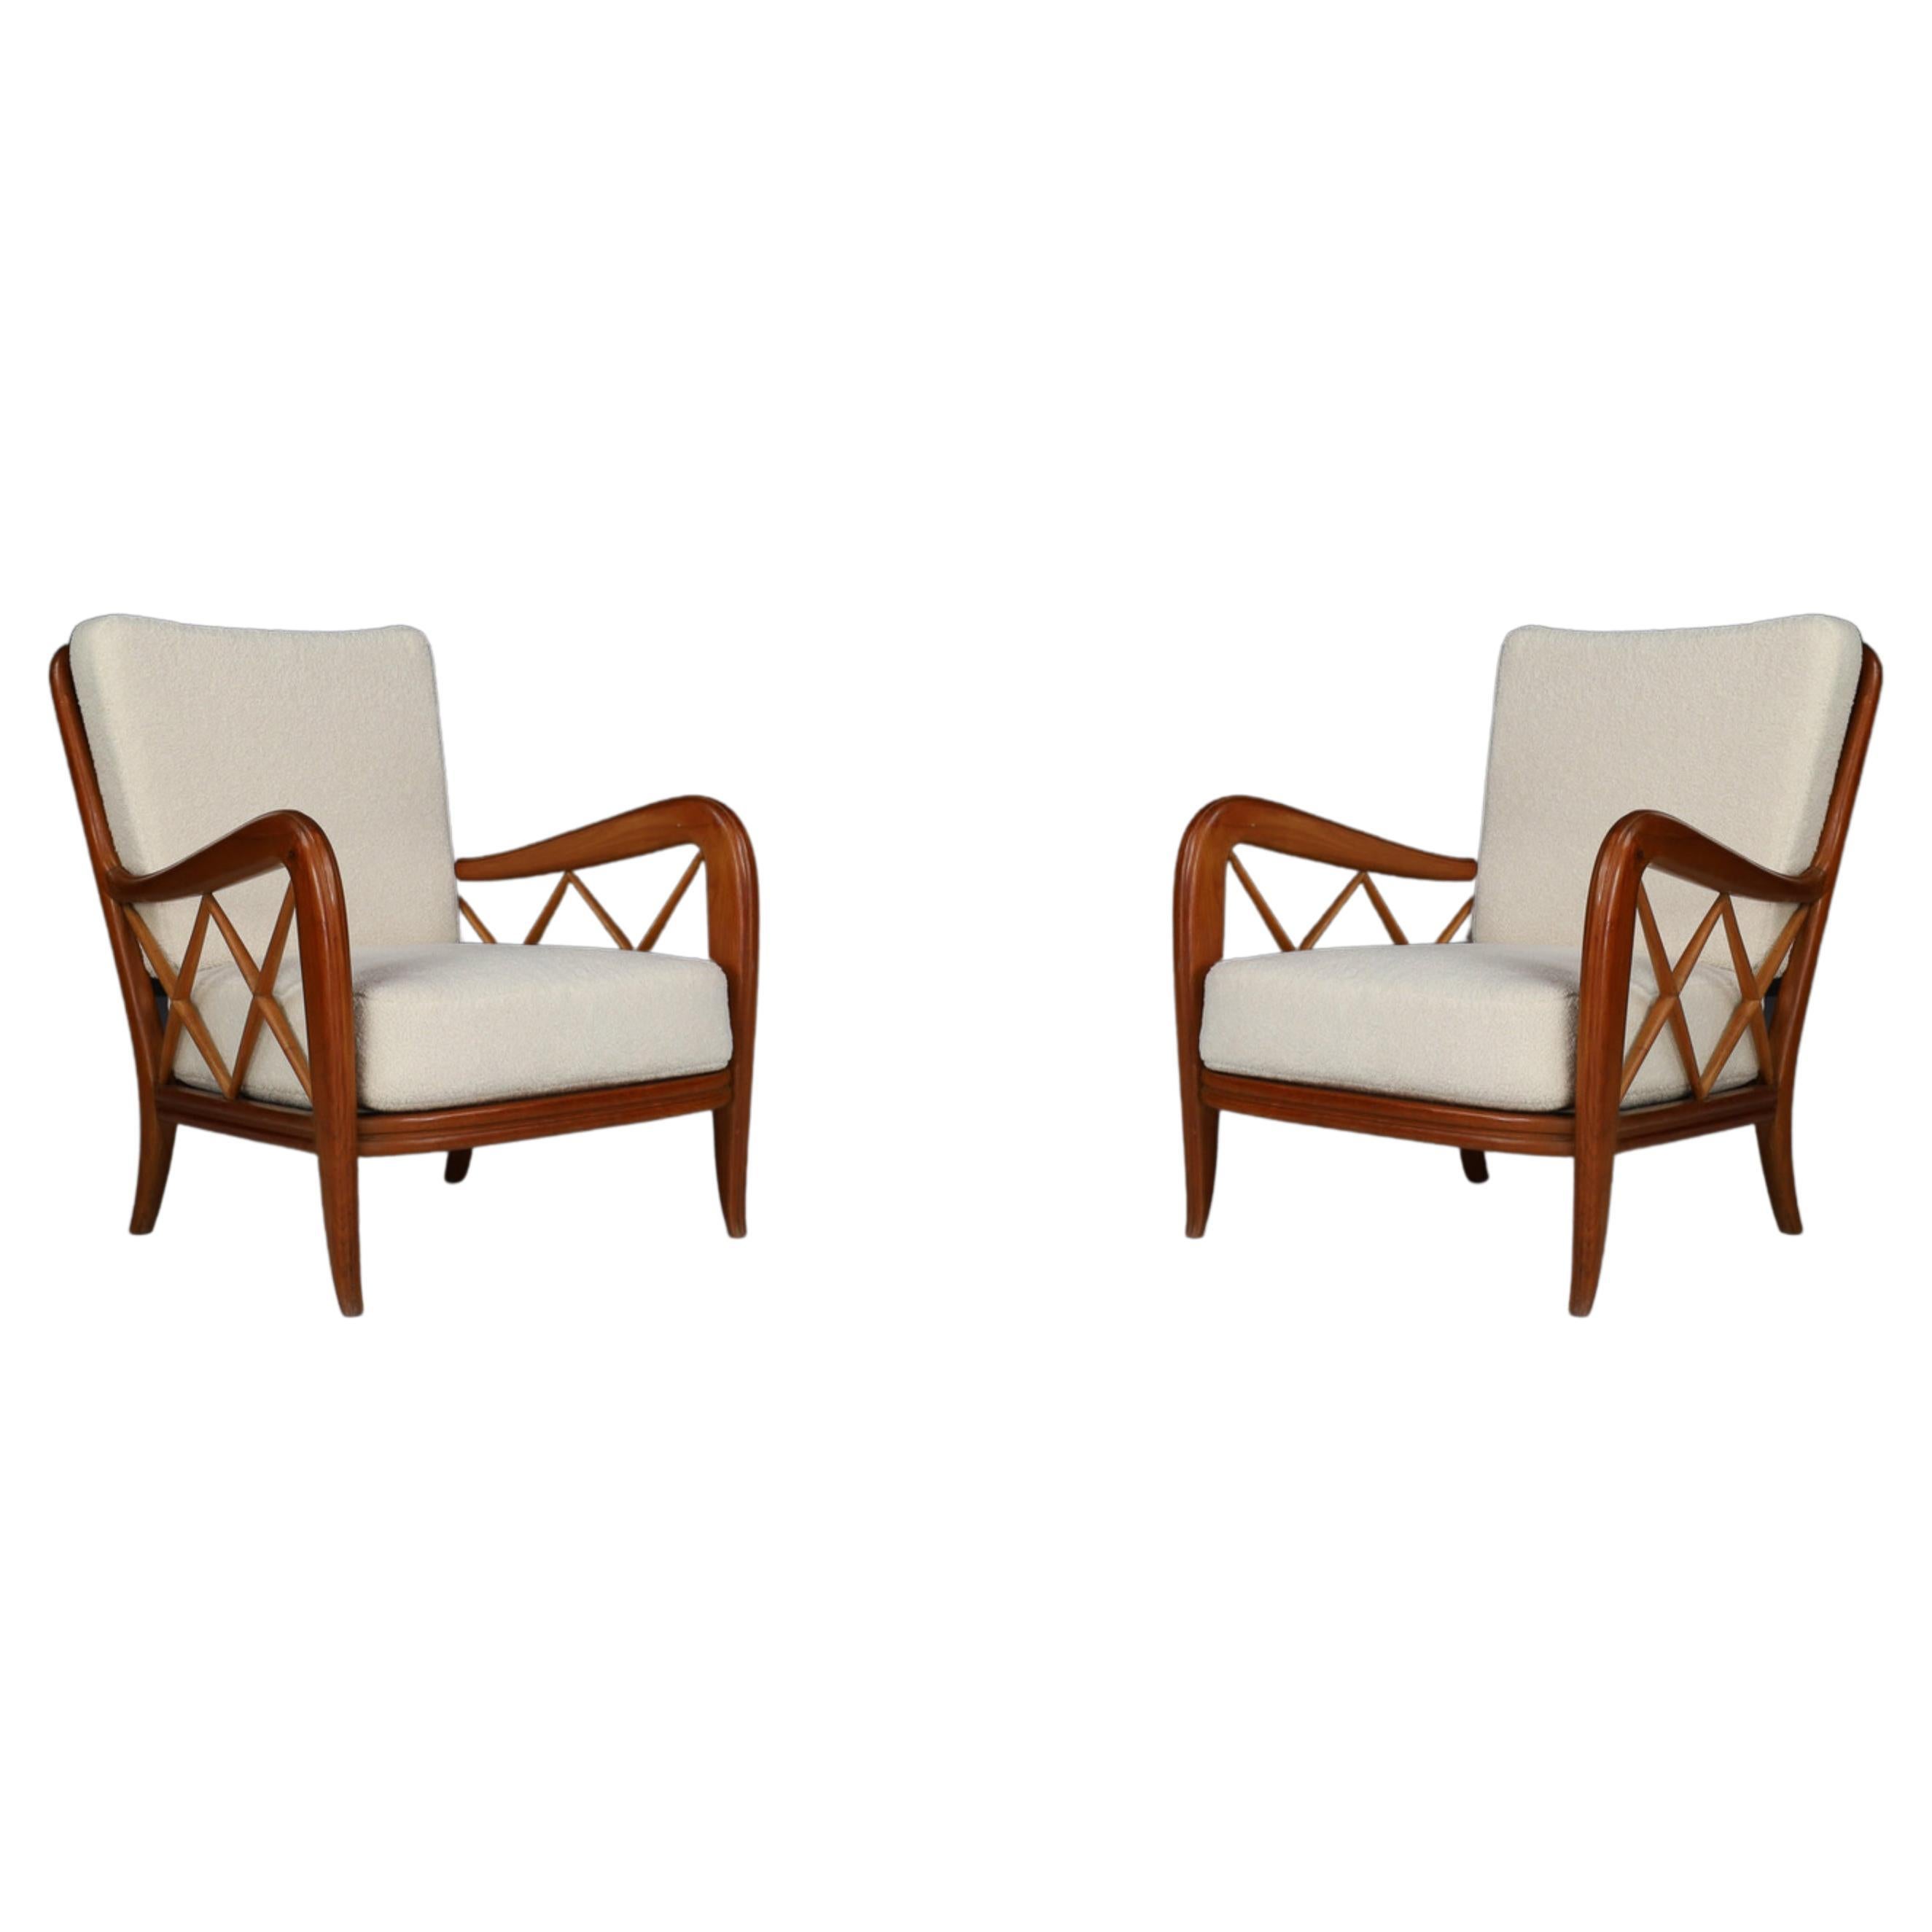 Paolo Buffa walnut and teddy fabric armchairs, Italy 1950s.

Italian pair of two lounge chairs made of hand-carved walnut and re-upholstered teddy fabric designed by Paolo Buffa in Italy 1950s. These two armchairs would be an eye-catching addition